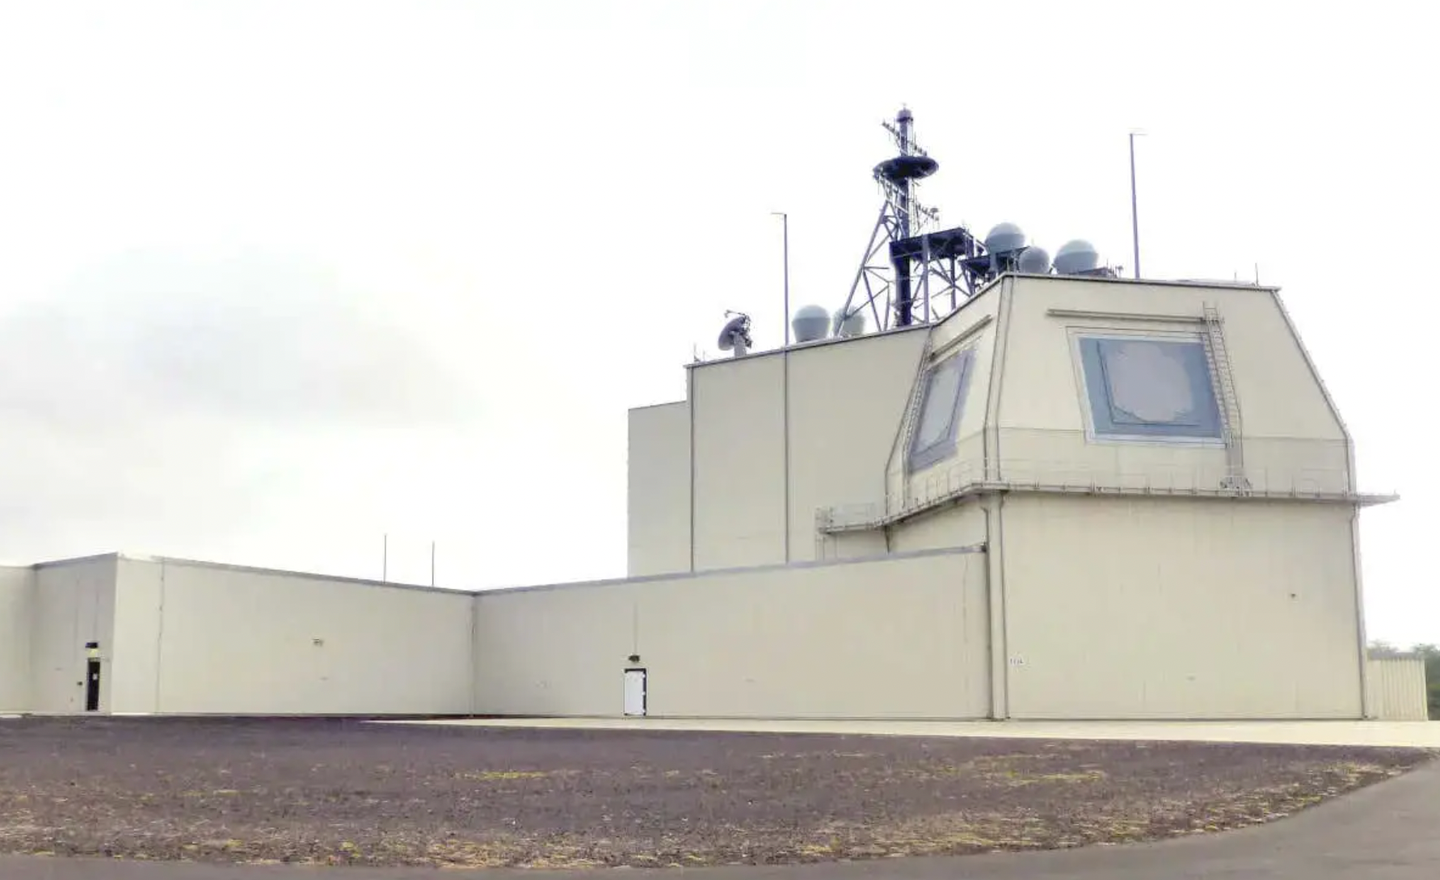 The main control center at the Aegis Ashore missile defense test complex in Kauai, Hawaii. Japan’s Aegis Ashore sites were expected to be of a similar design, but with the AN/SPY-7 radar instead of the AN/SPY-1 seen here.&nbsp;<em>KYODO VIA AP IMAGES</em>